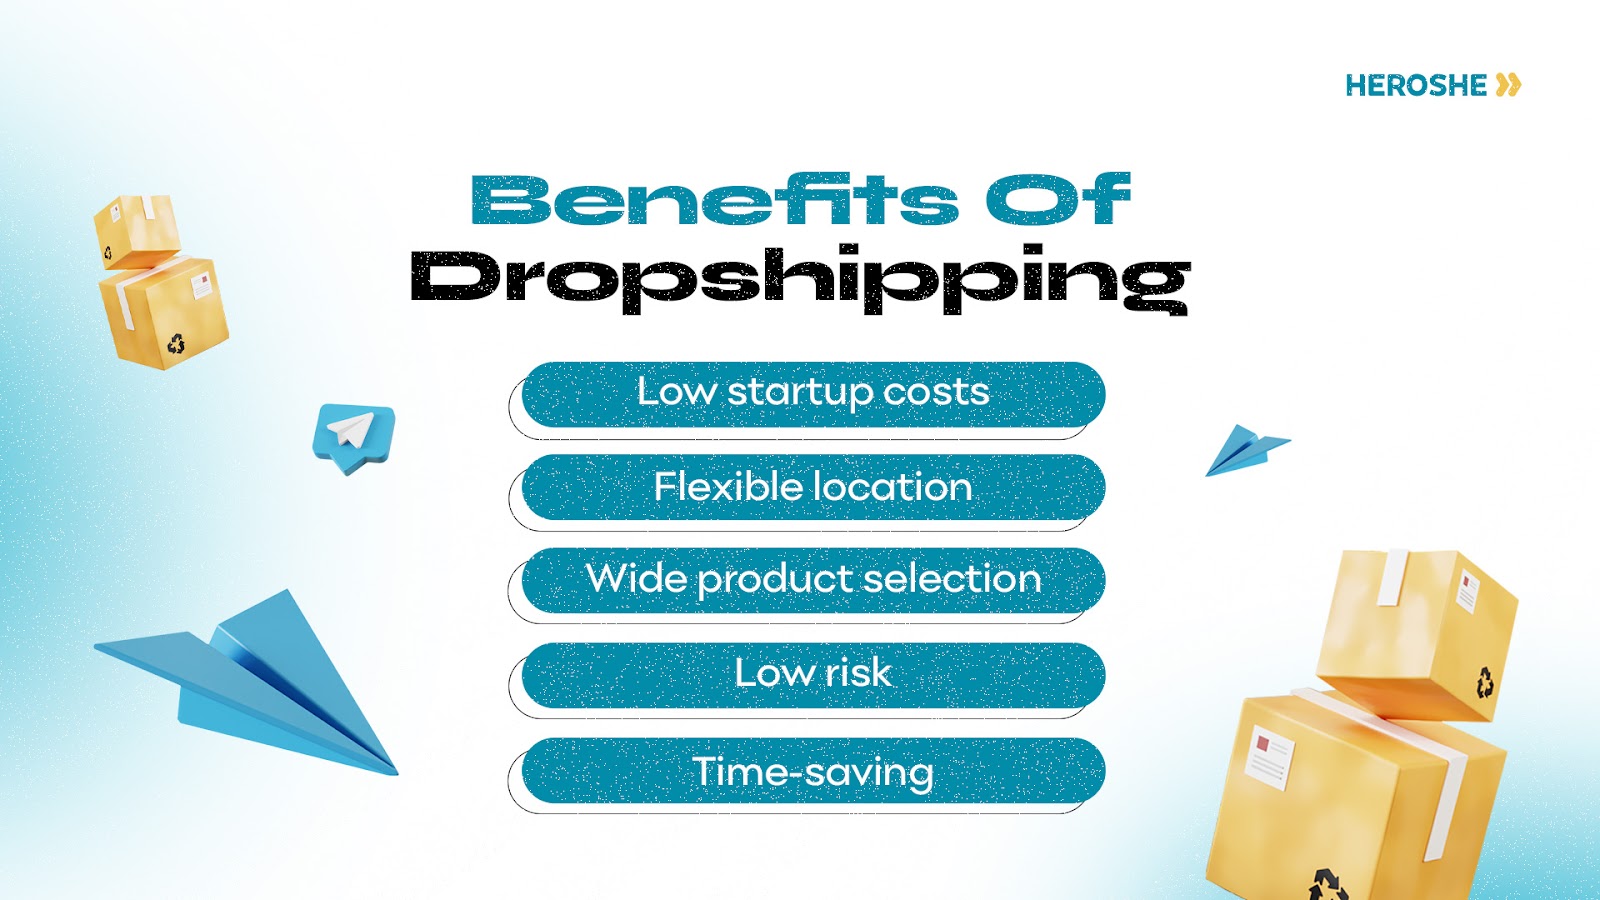 A poster showing the benefits of dropshipping